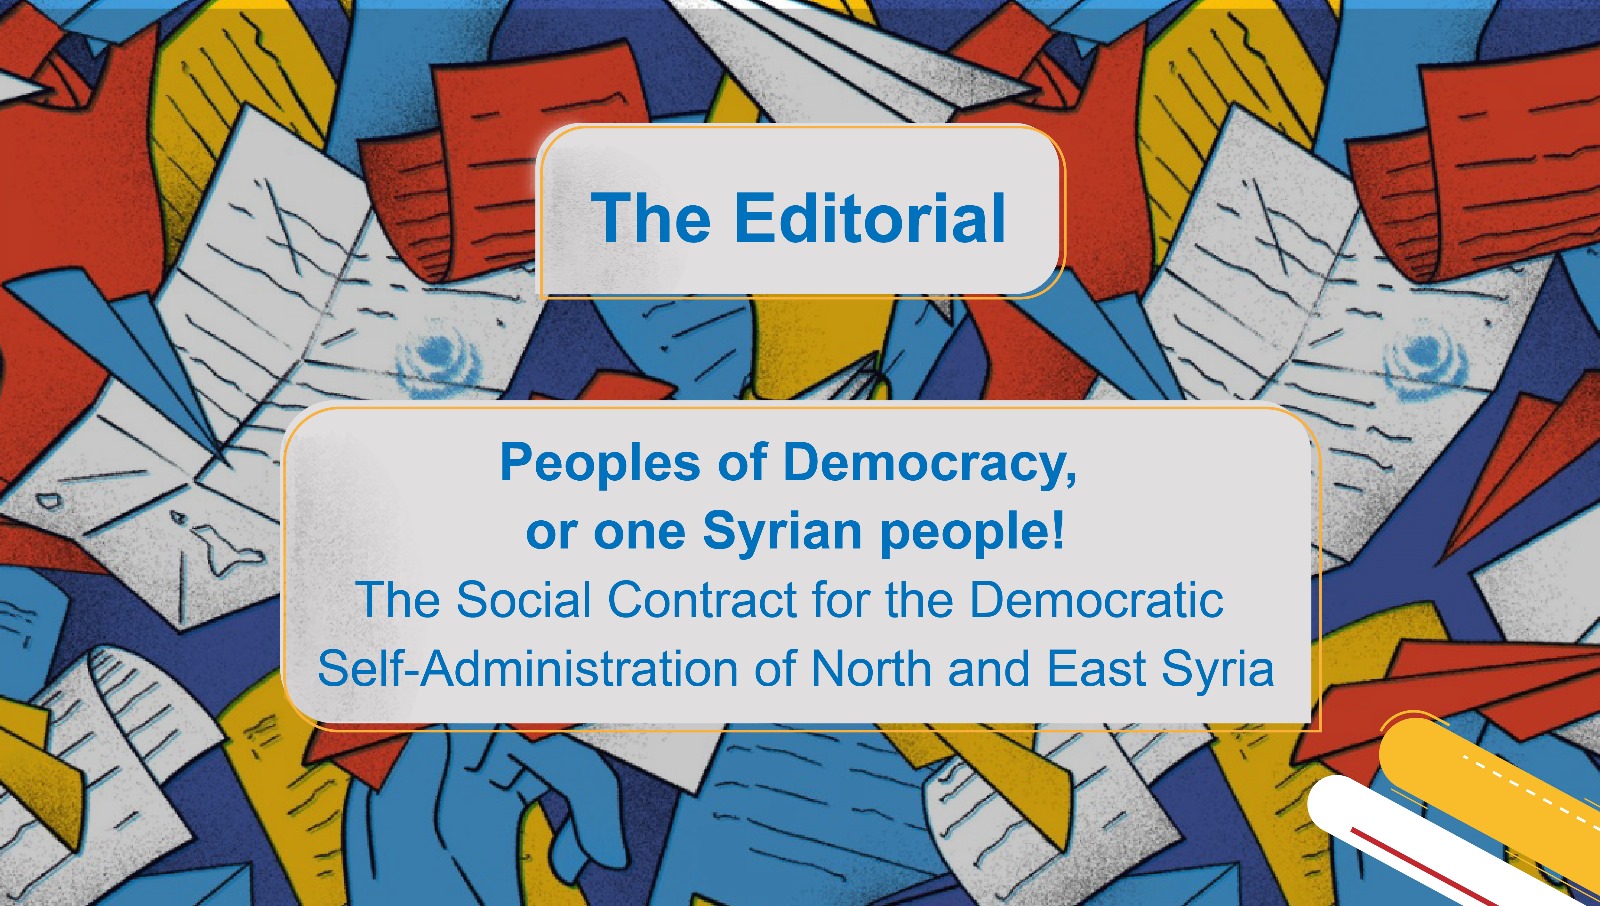 Peoples of Democracy, or one Syrian people! The Social Contract for the Democratic Self-Administration of North and East Syria